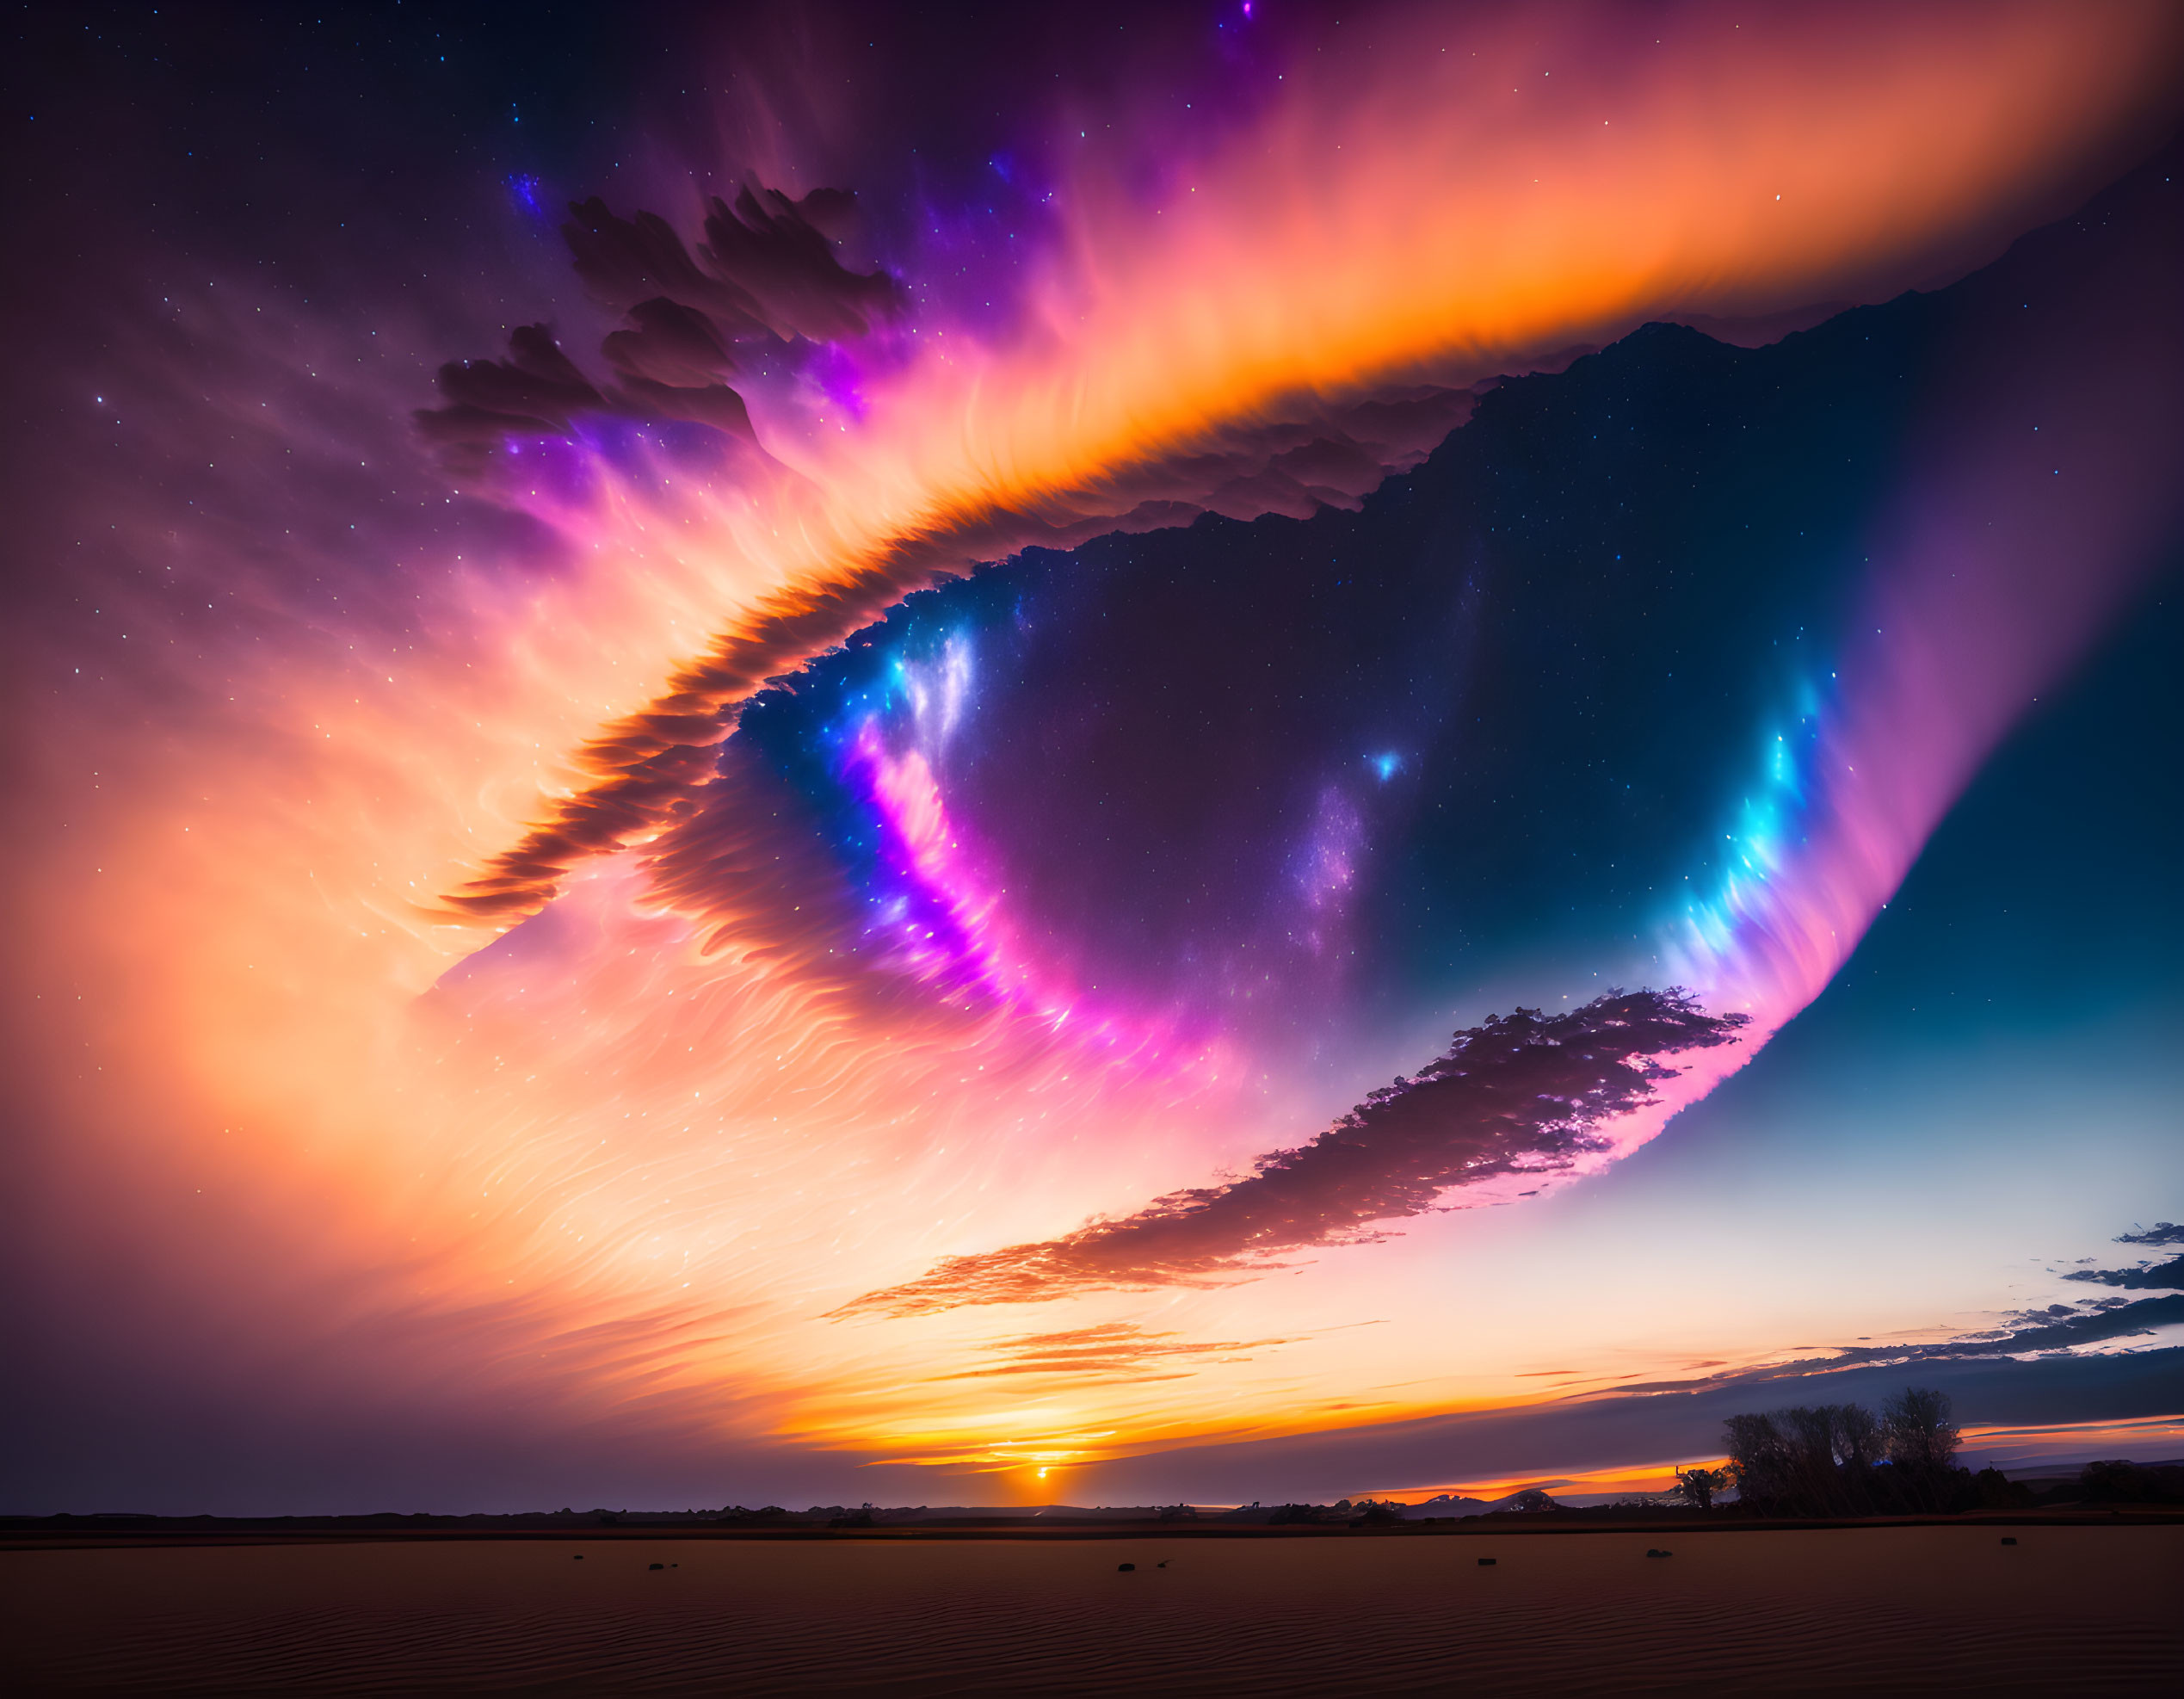 Colorful swirling clouds at sunset over dark landscape